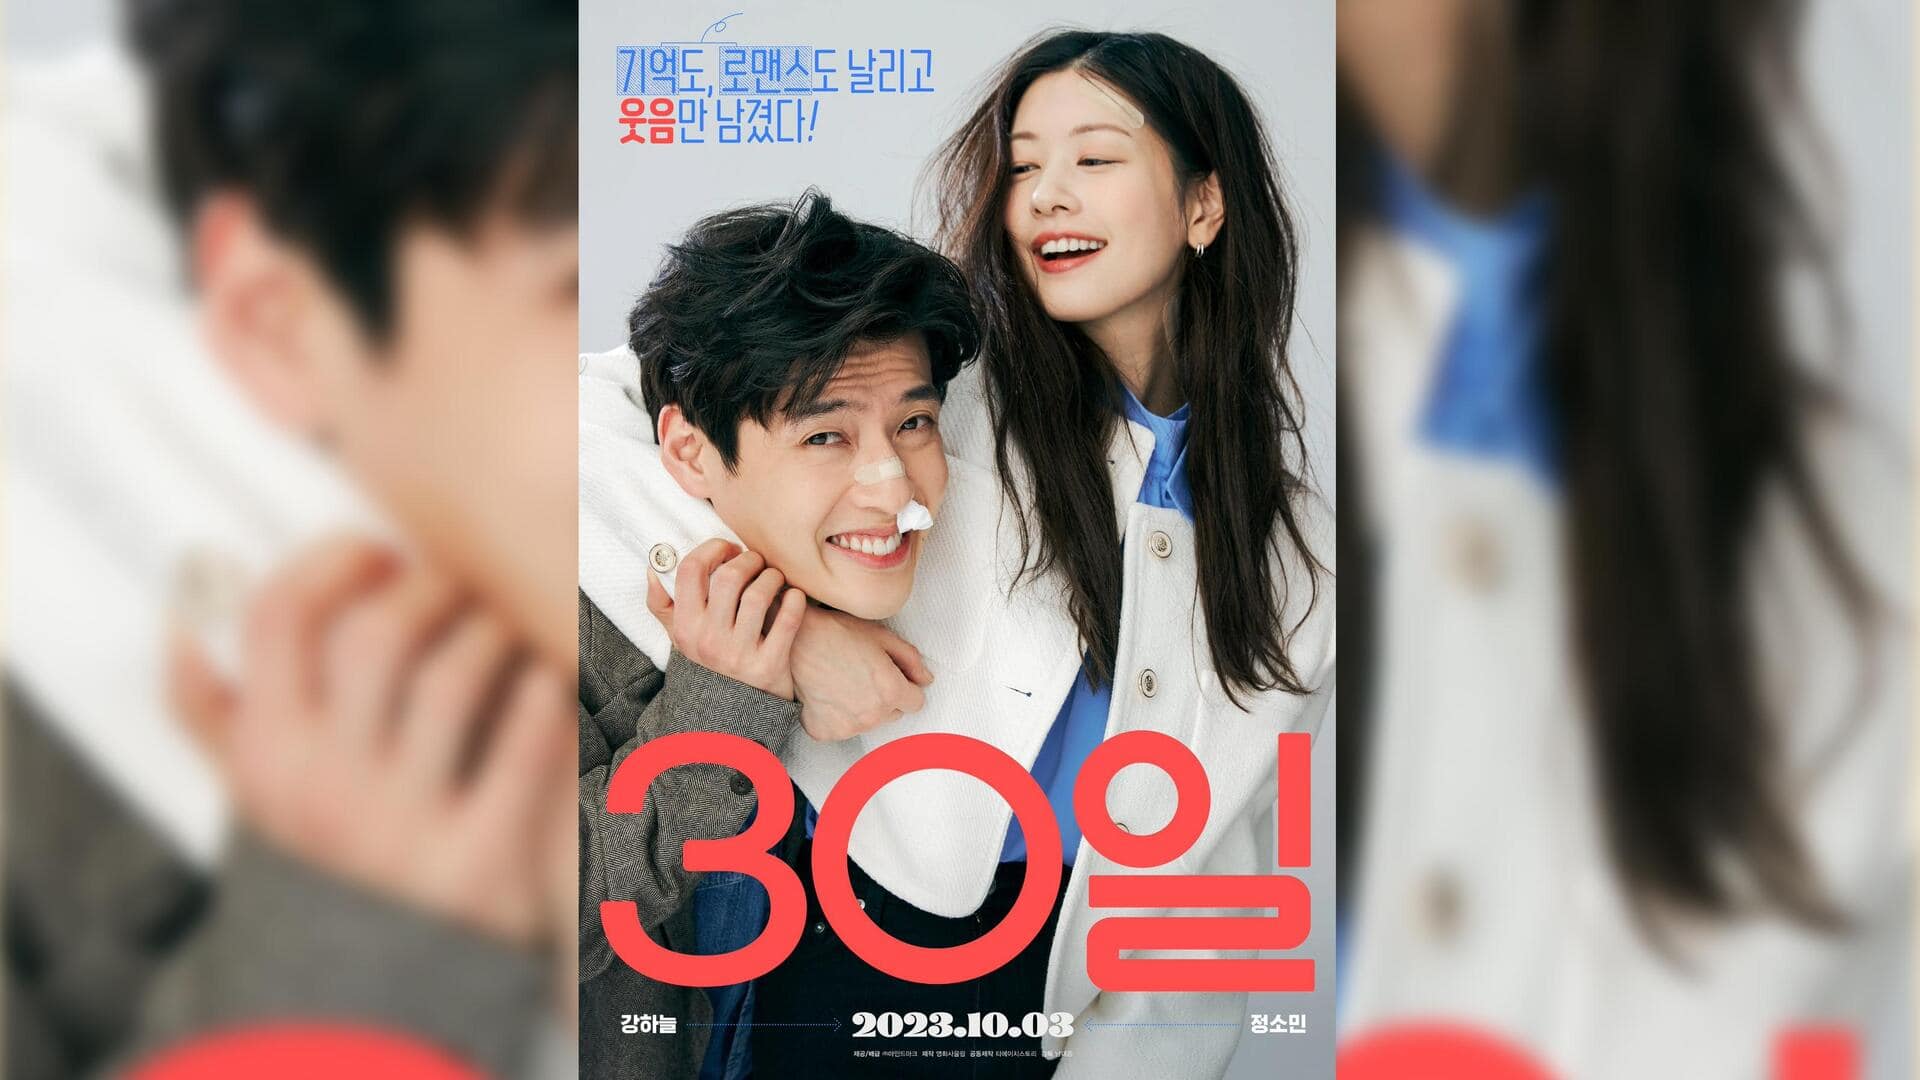 Korean film '30 Days': Cast, summary, release date out